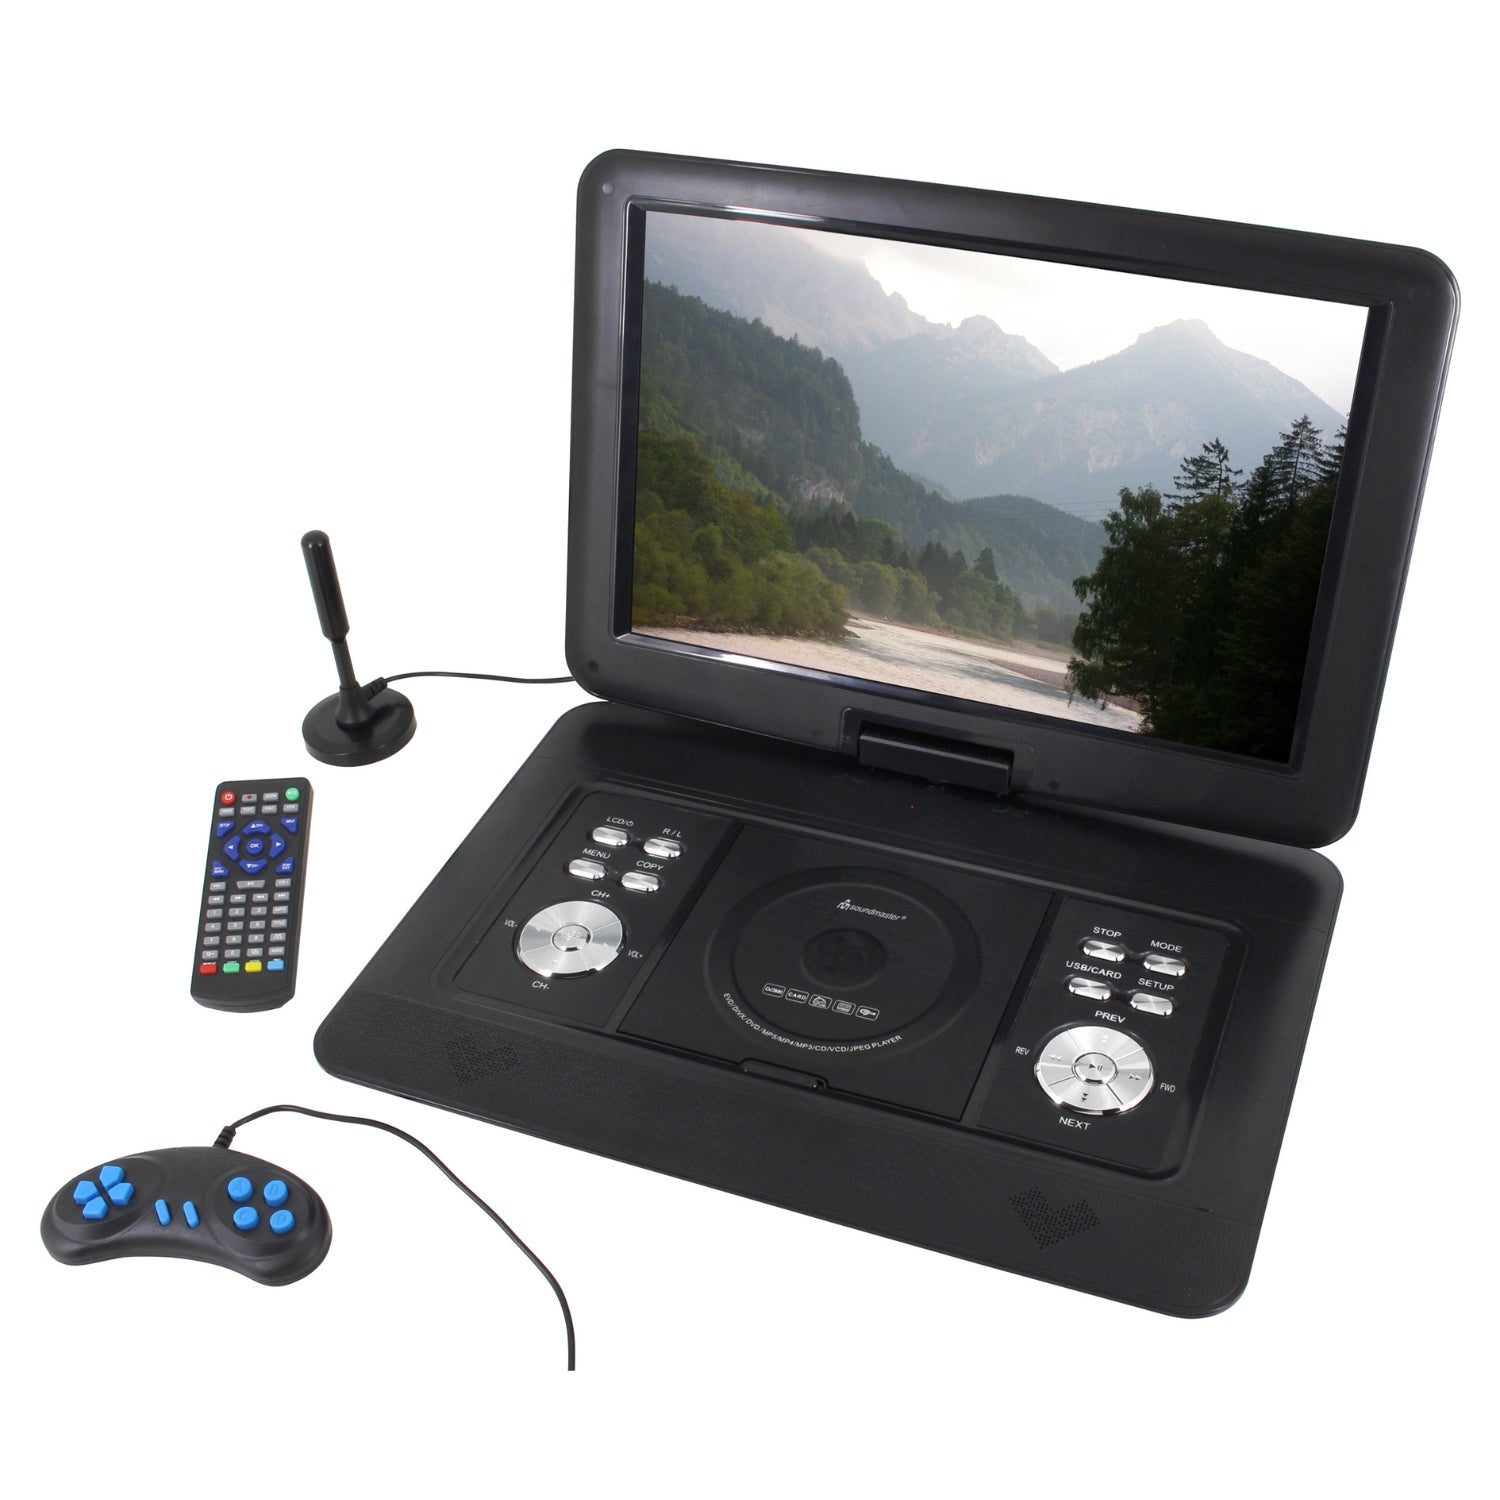 Soundmaster PDB1600SW portable DVD player with DVB-T2 HD tuner and 15.4" TFT screen incl. 300 games